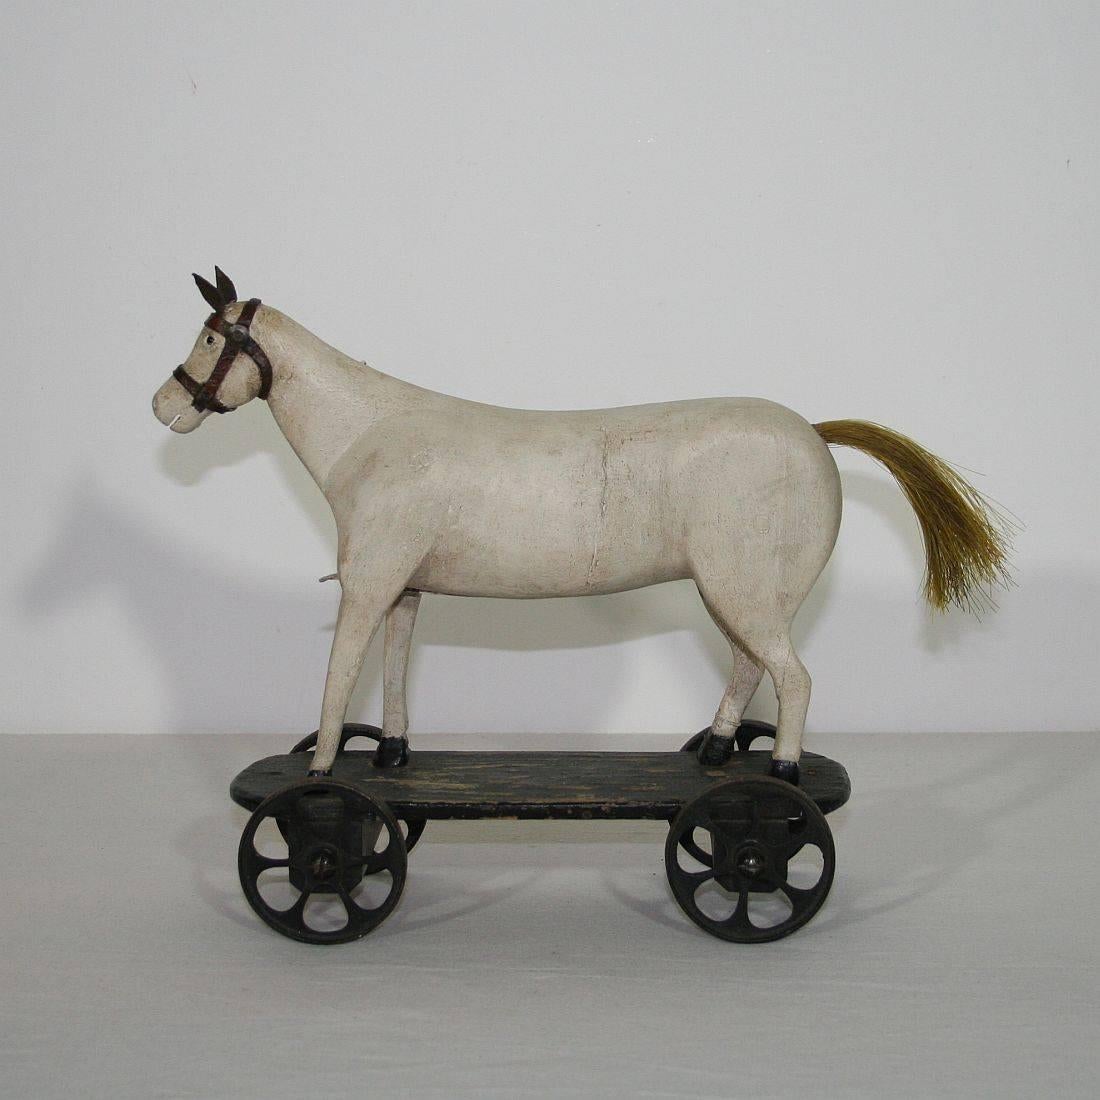 French Provincial Small 19th Century French Folk Art Wooden Horse